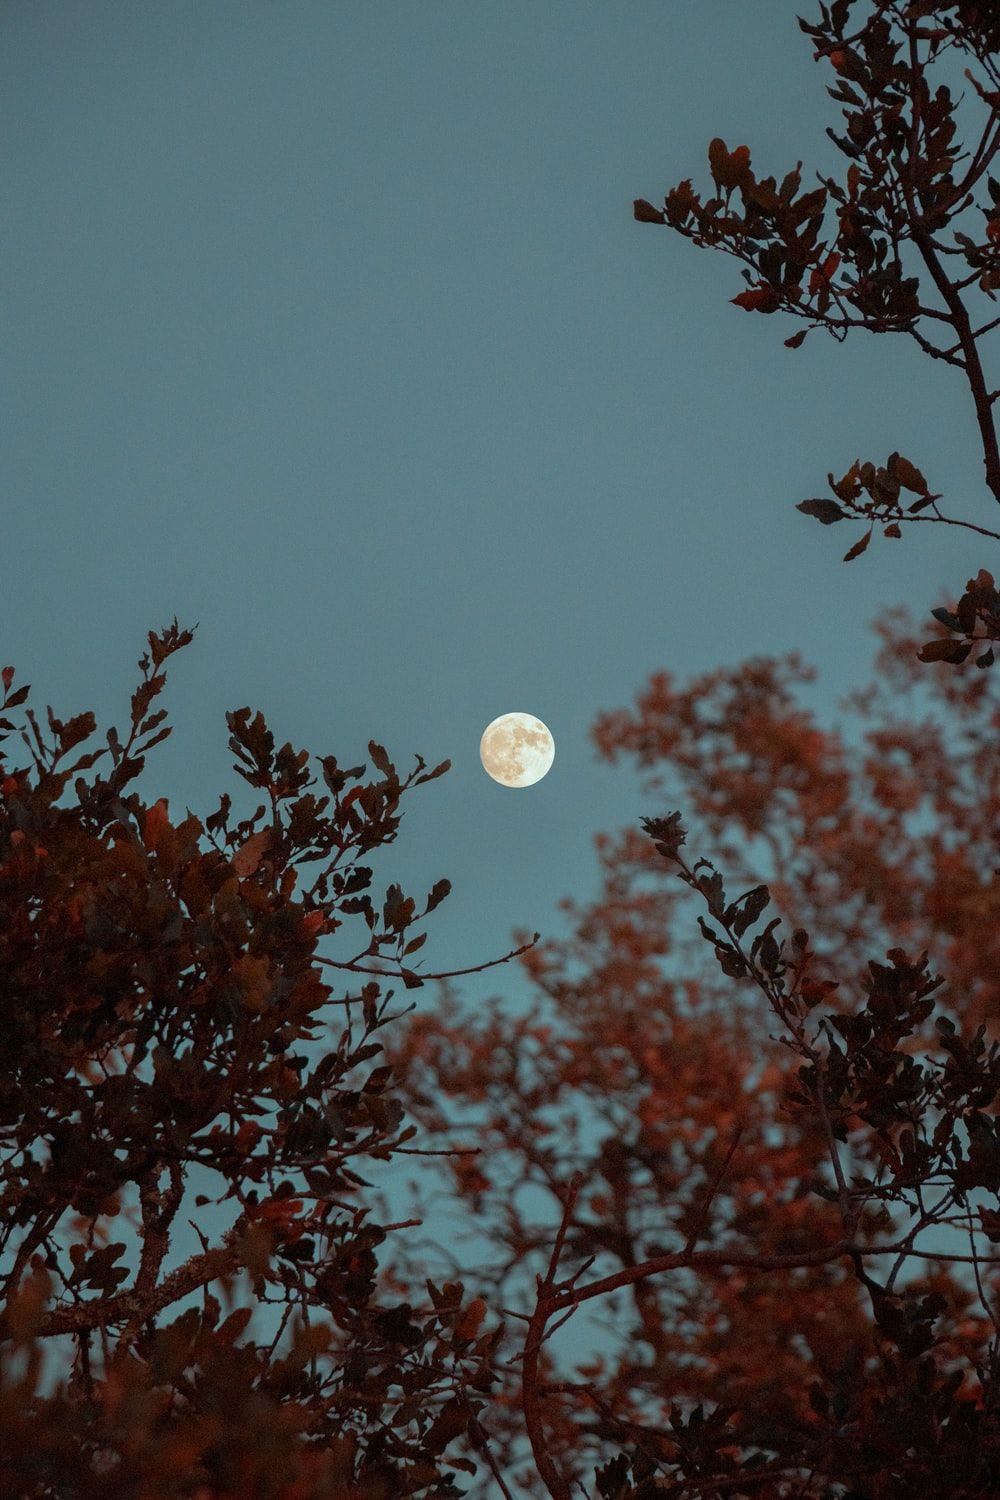 Full Moon Picture. Download Free Image